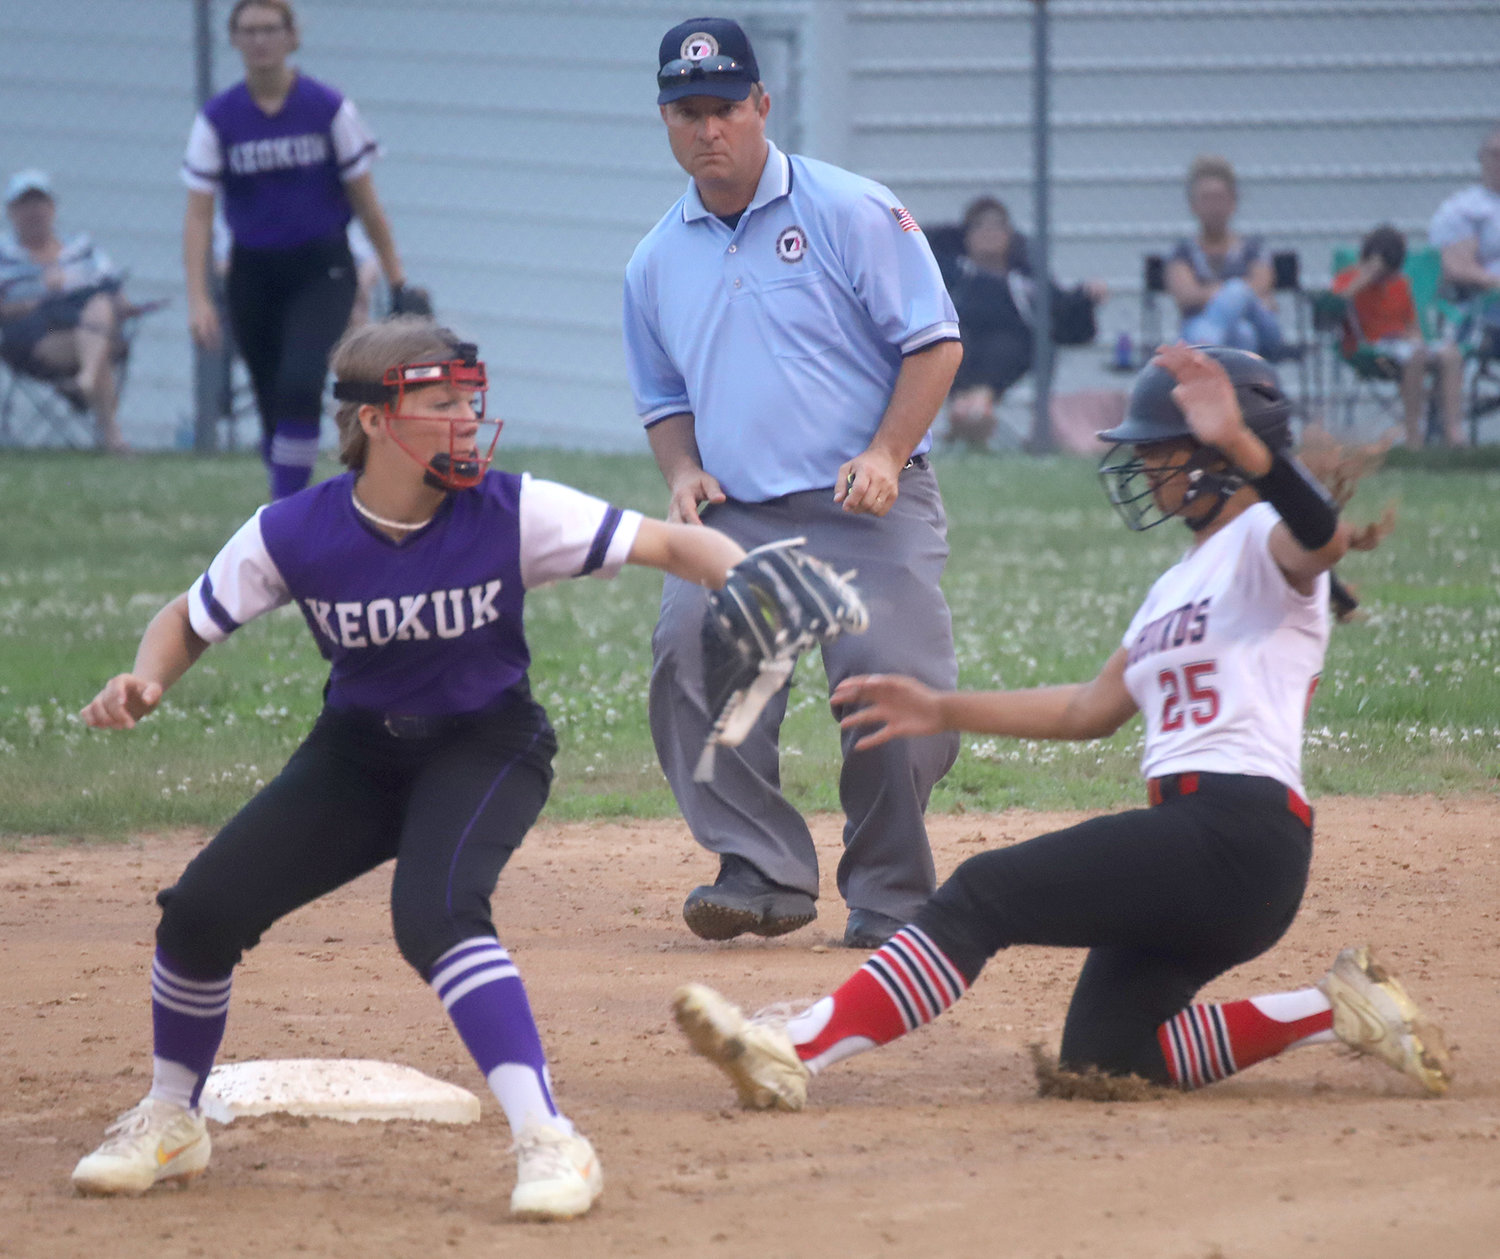 The Bloodhounds Olivia Buckner slides into second ahead of a throw in Friday's 5-0 win over Keokuk.